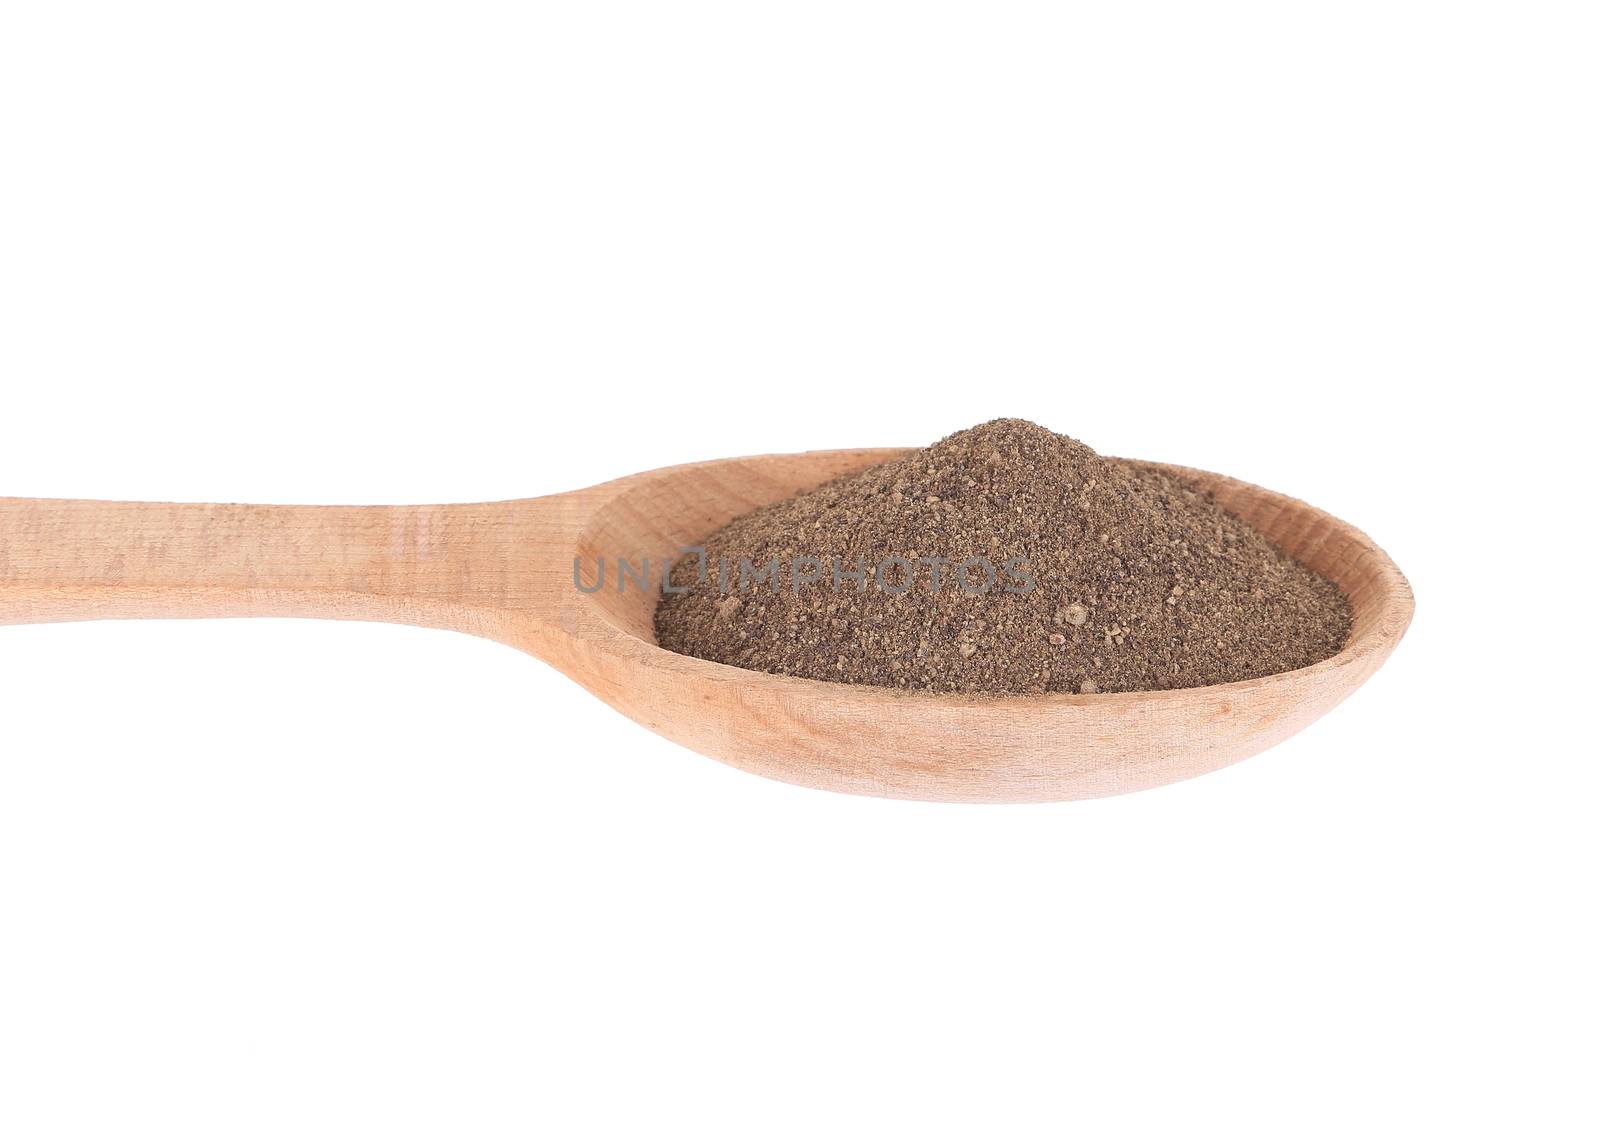 Wooden spoon with milled black pepper. by indigolotos